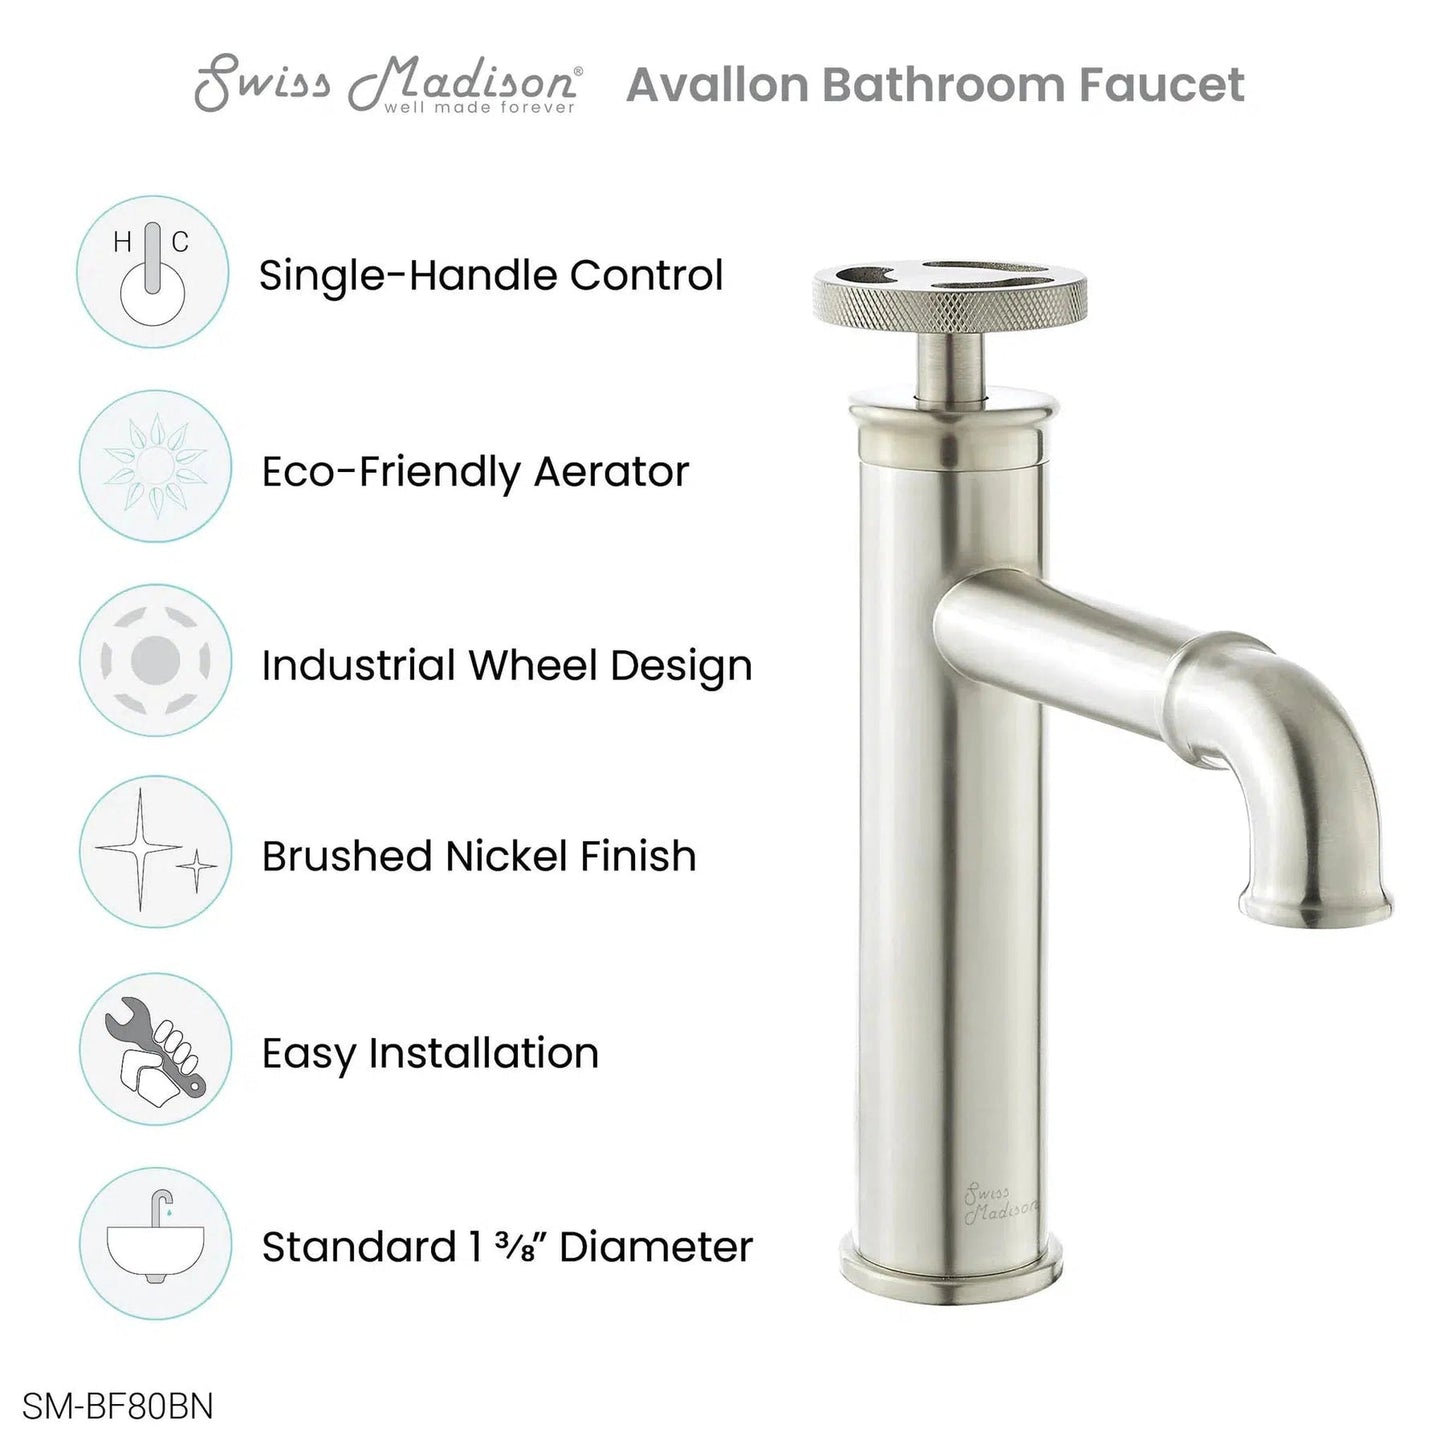 Swiss Madison Avallon 7" Single-Handle Brushed Nickel Bathroom Faucet With 1.2 GPM Flow Rate